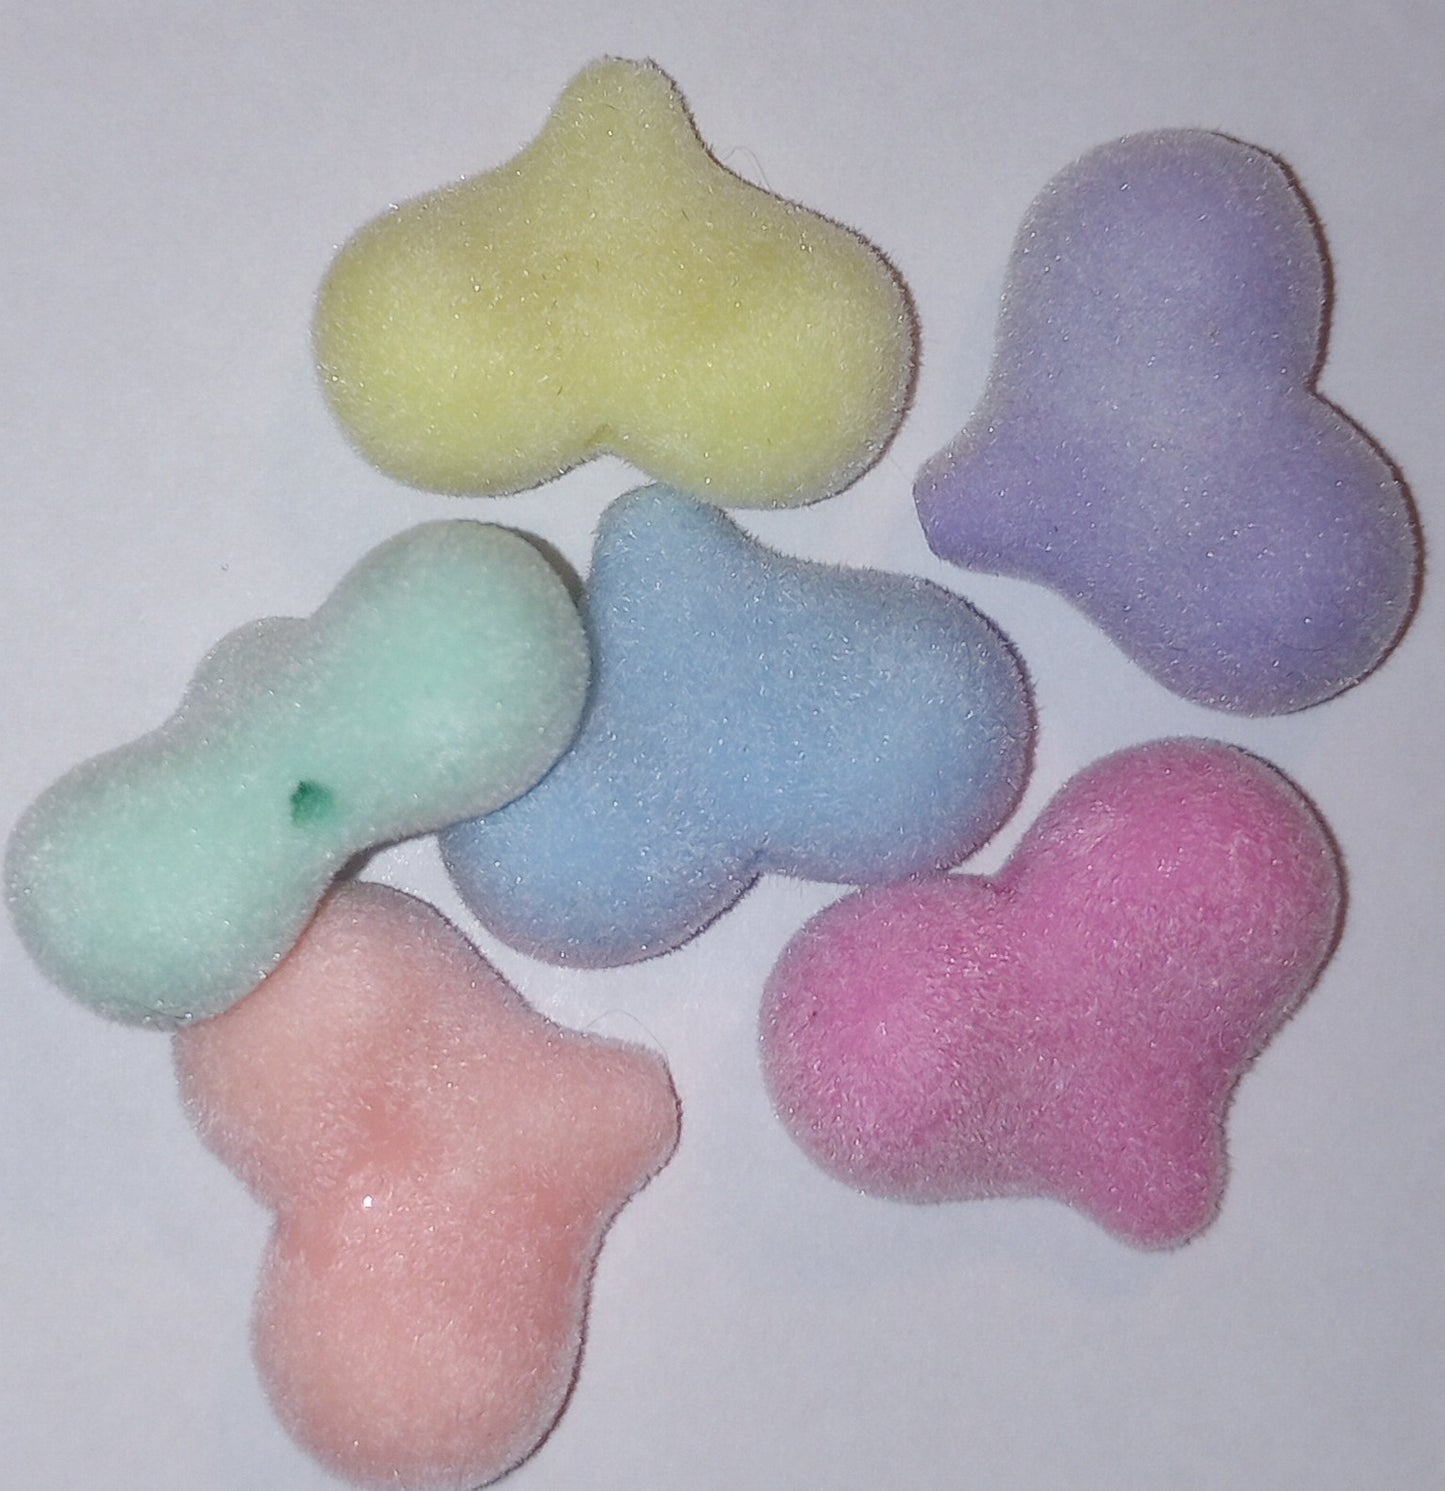 Fuzzy Heart Beads for Pen Decorating - 5 per pack